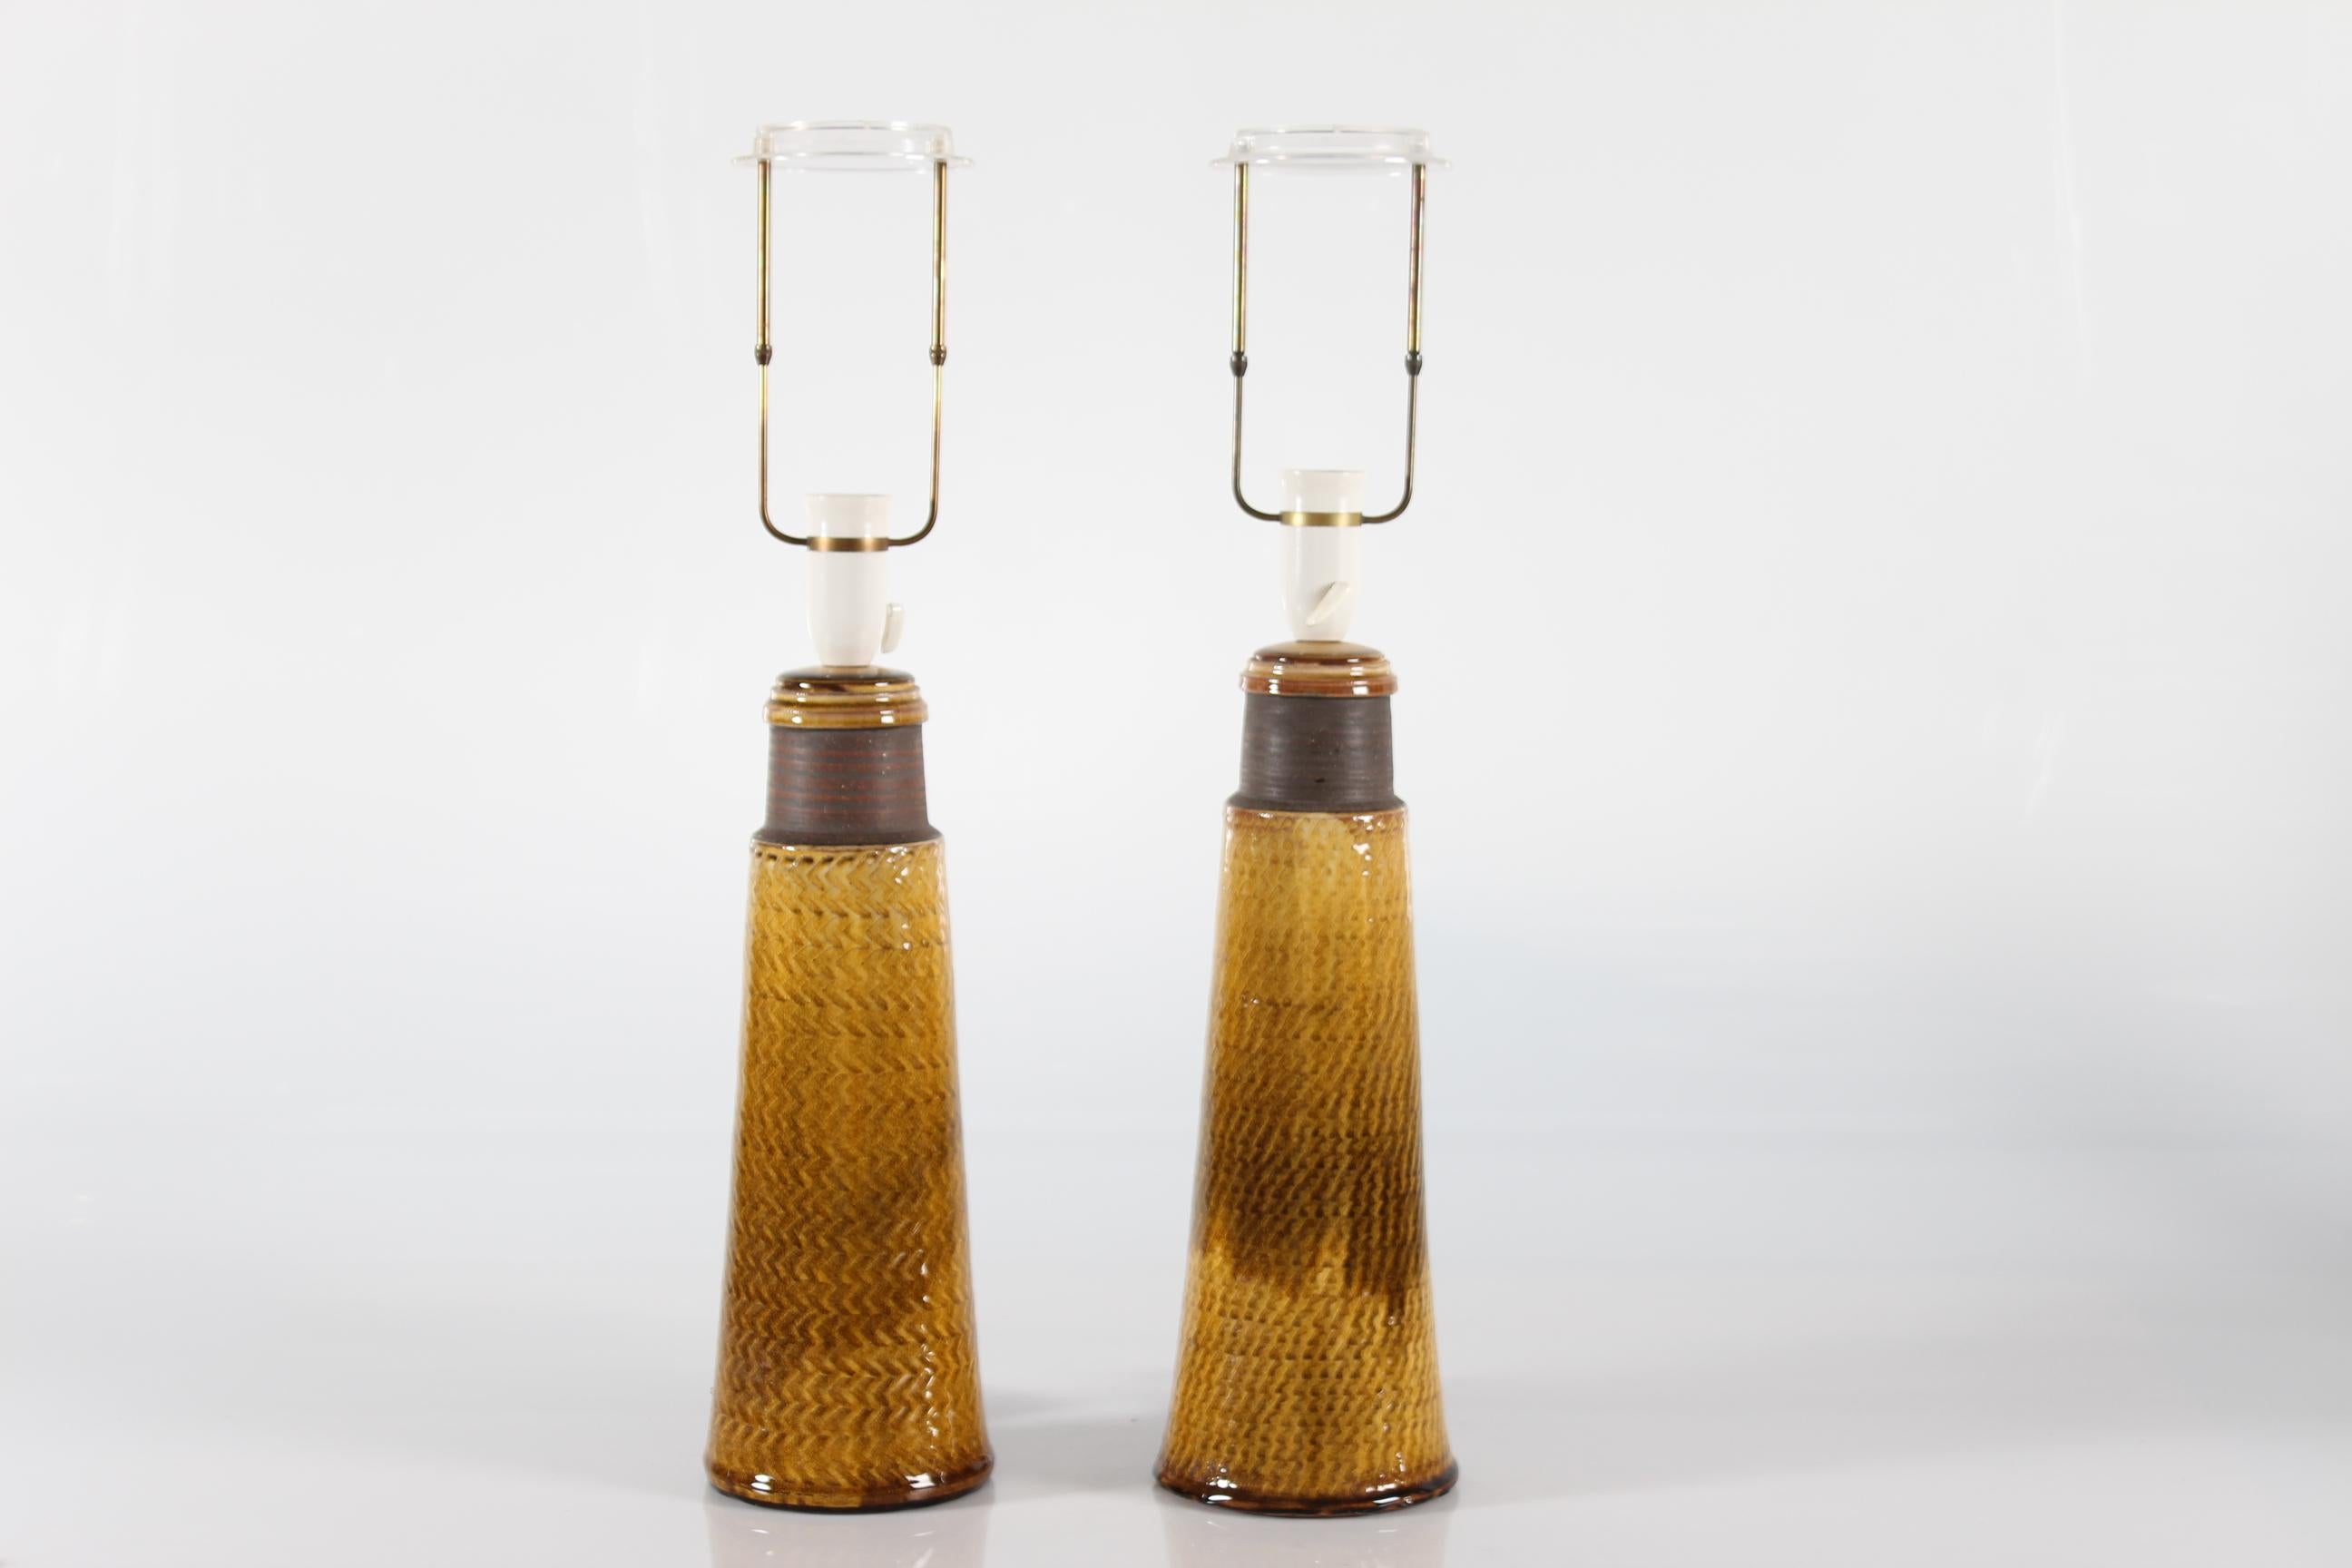 Mid-20th Century Pair of Kähler Ceramic Table Lamps with Amber-Colored Glaze Denmark Midcentury